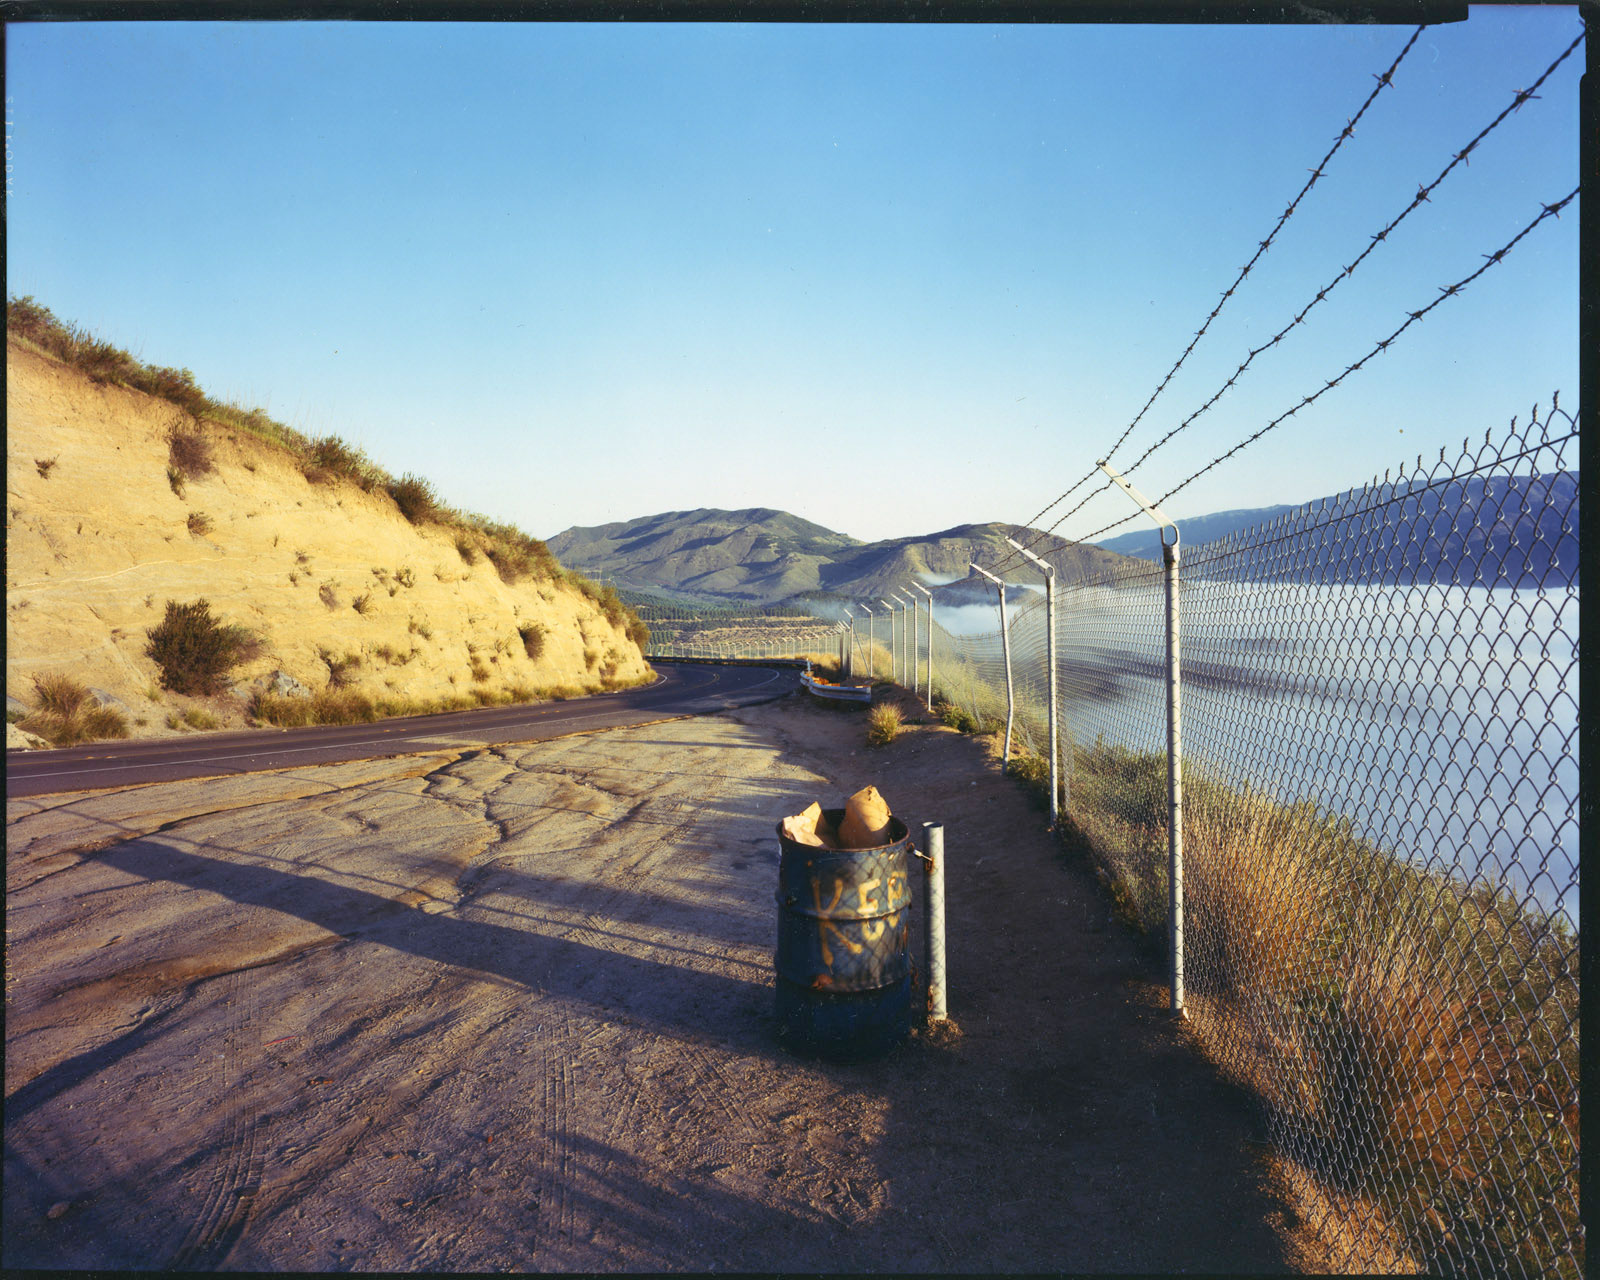 Hills in distance, eastern berm on left, chian-link fence on right, trash can center